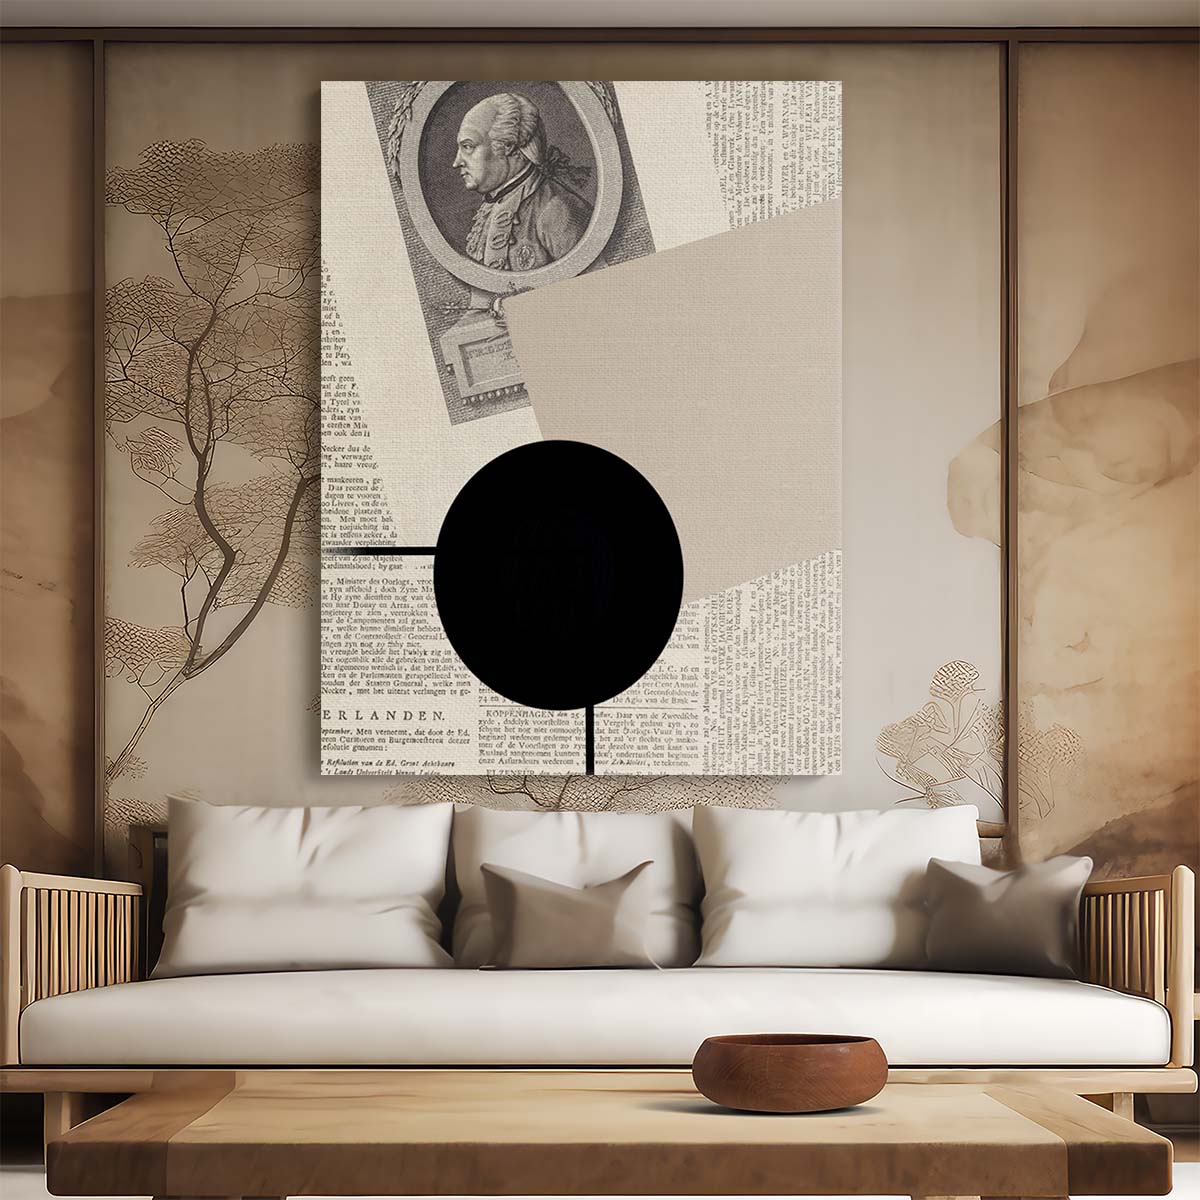 Modern Abstract Collage Illustration Artwork - Vintage Newspaper Style by Luxuriance Designs, made in USA